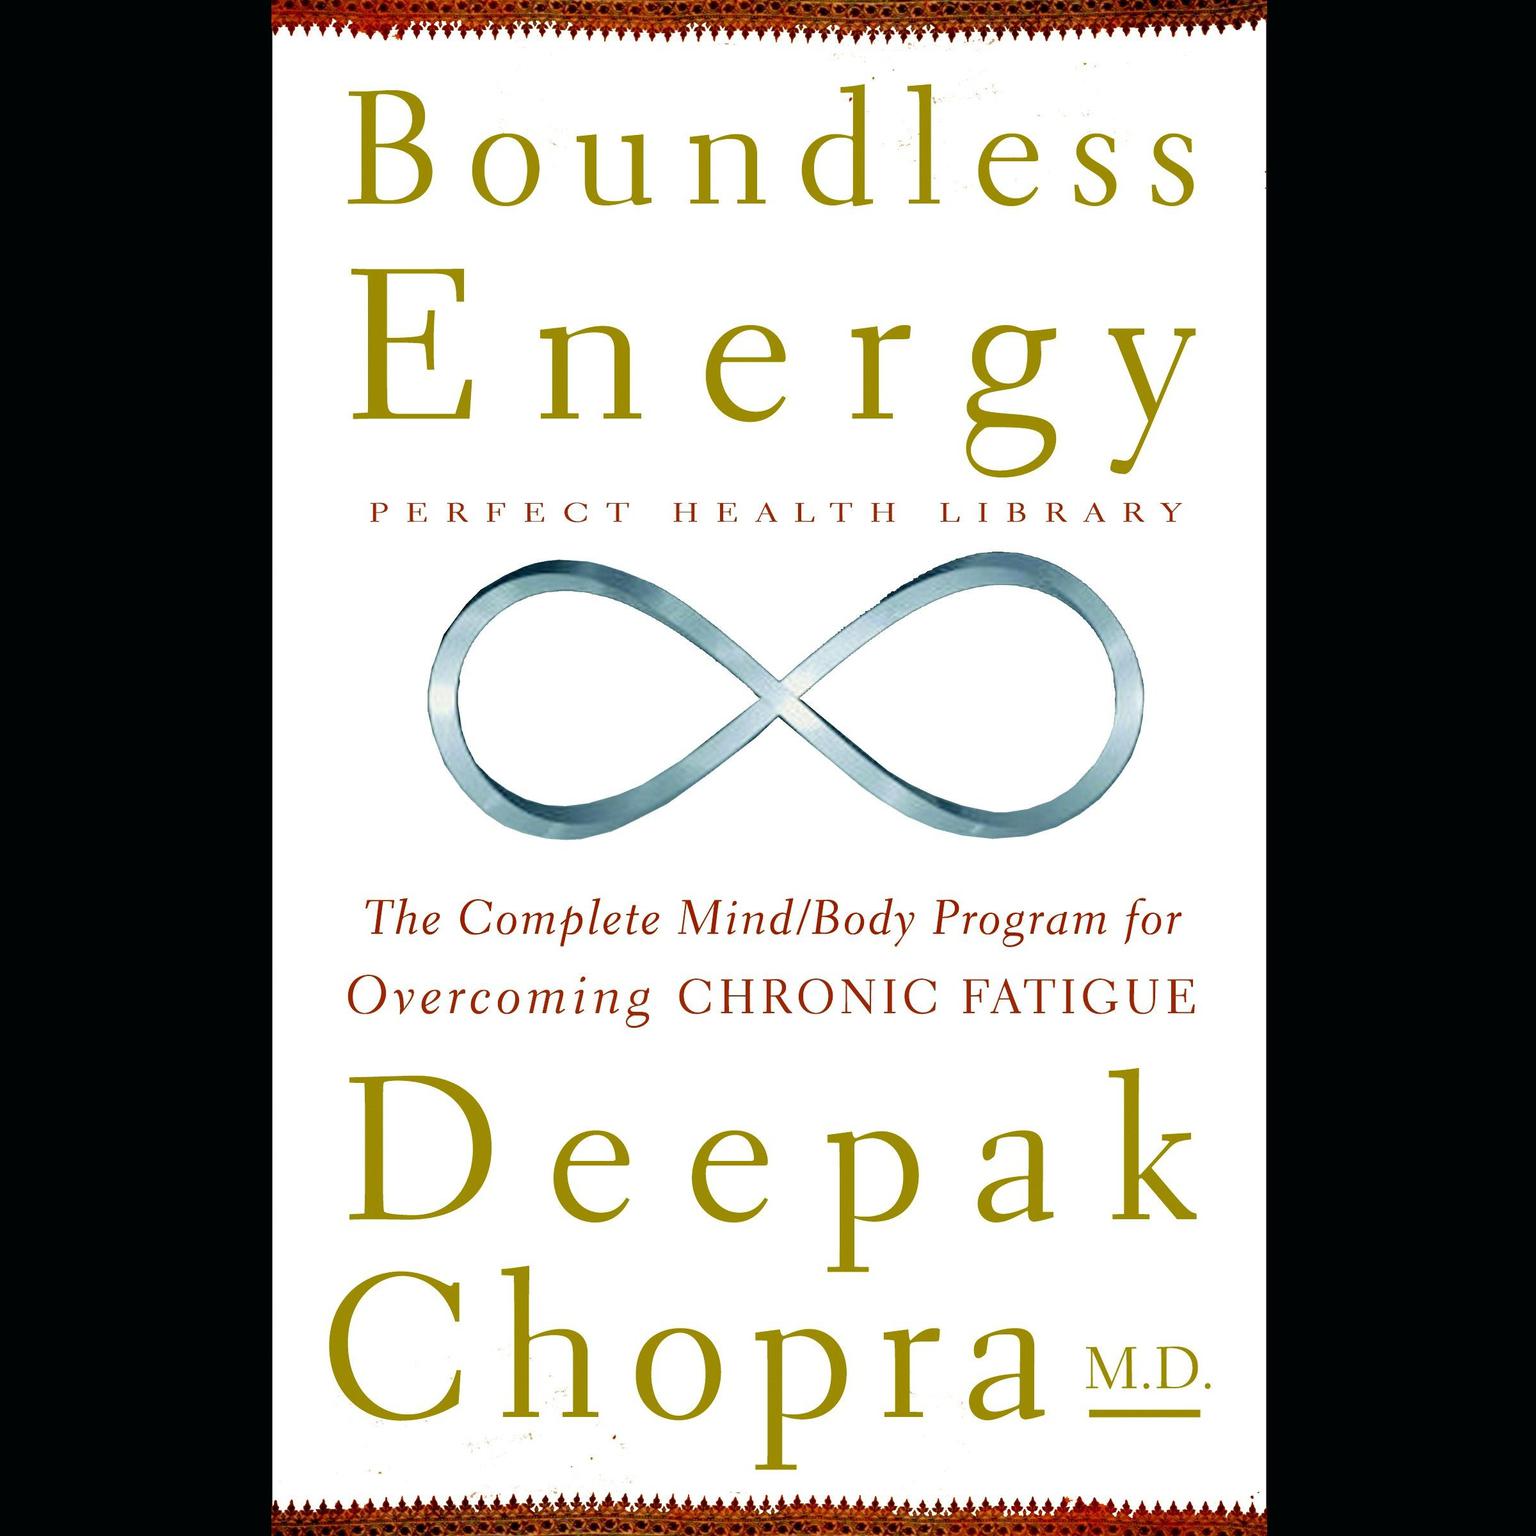 Boundless Energy (Abridged): The Complete Mind/Body Program for Overcoming Chronic Fatigue Audiobook, by Deepak Chopra